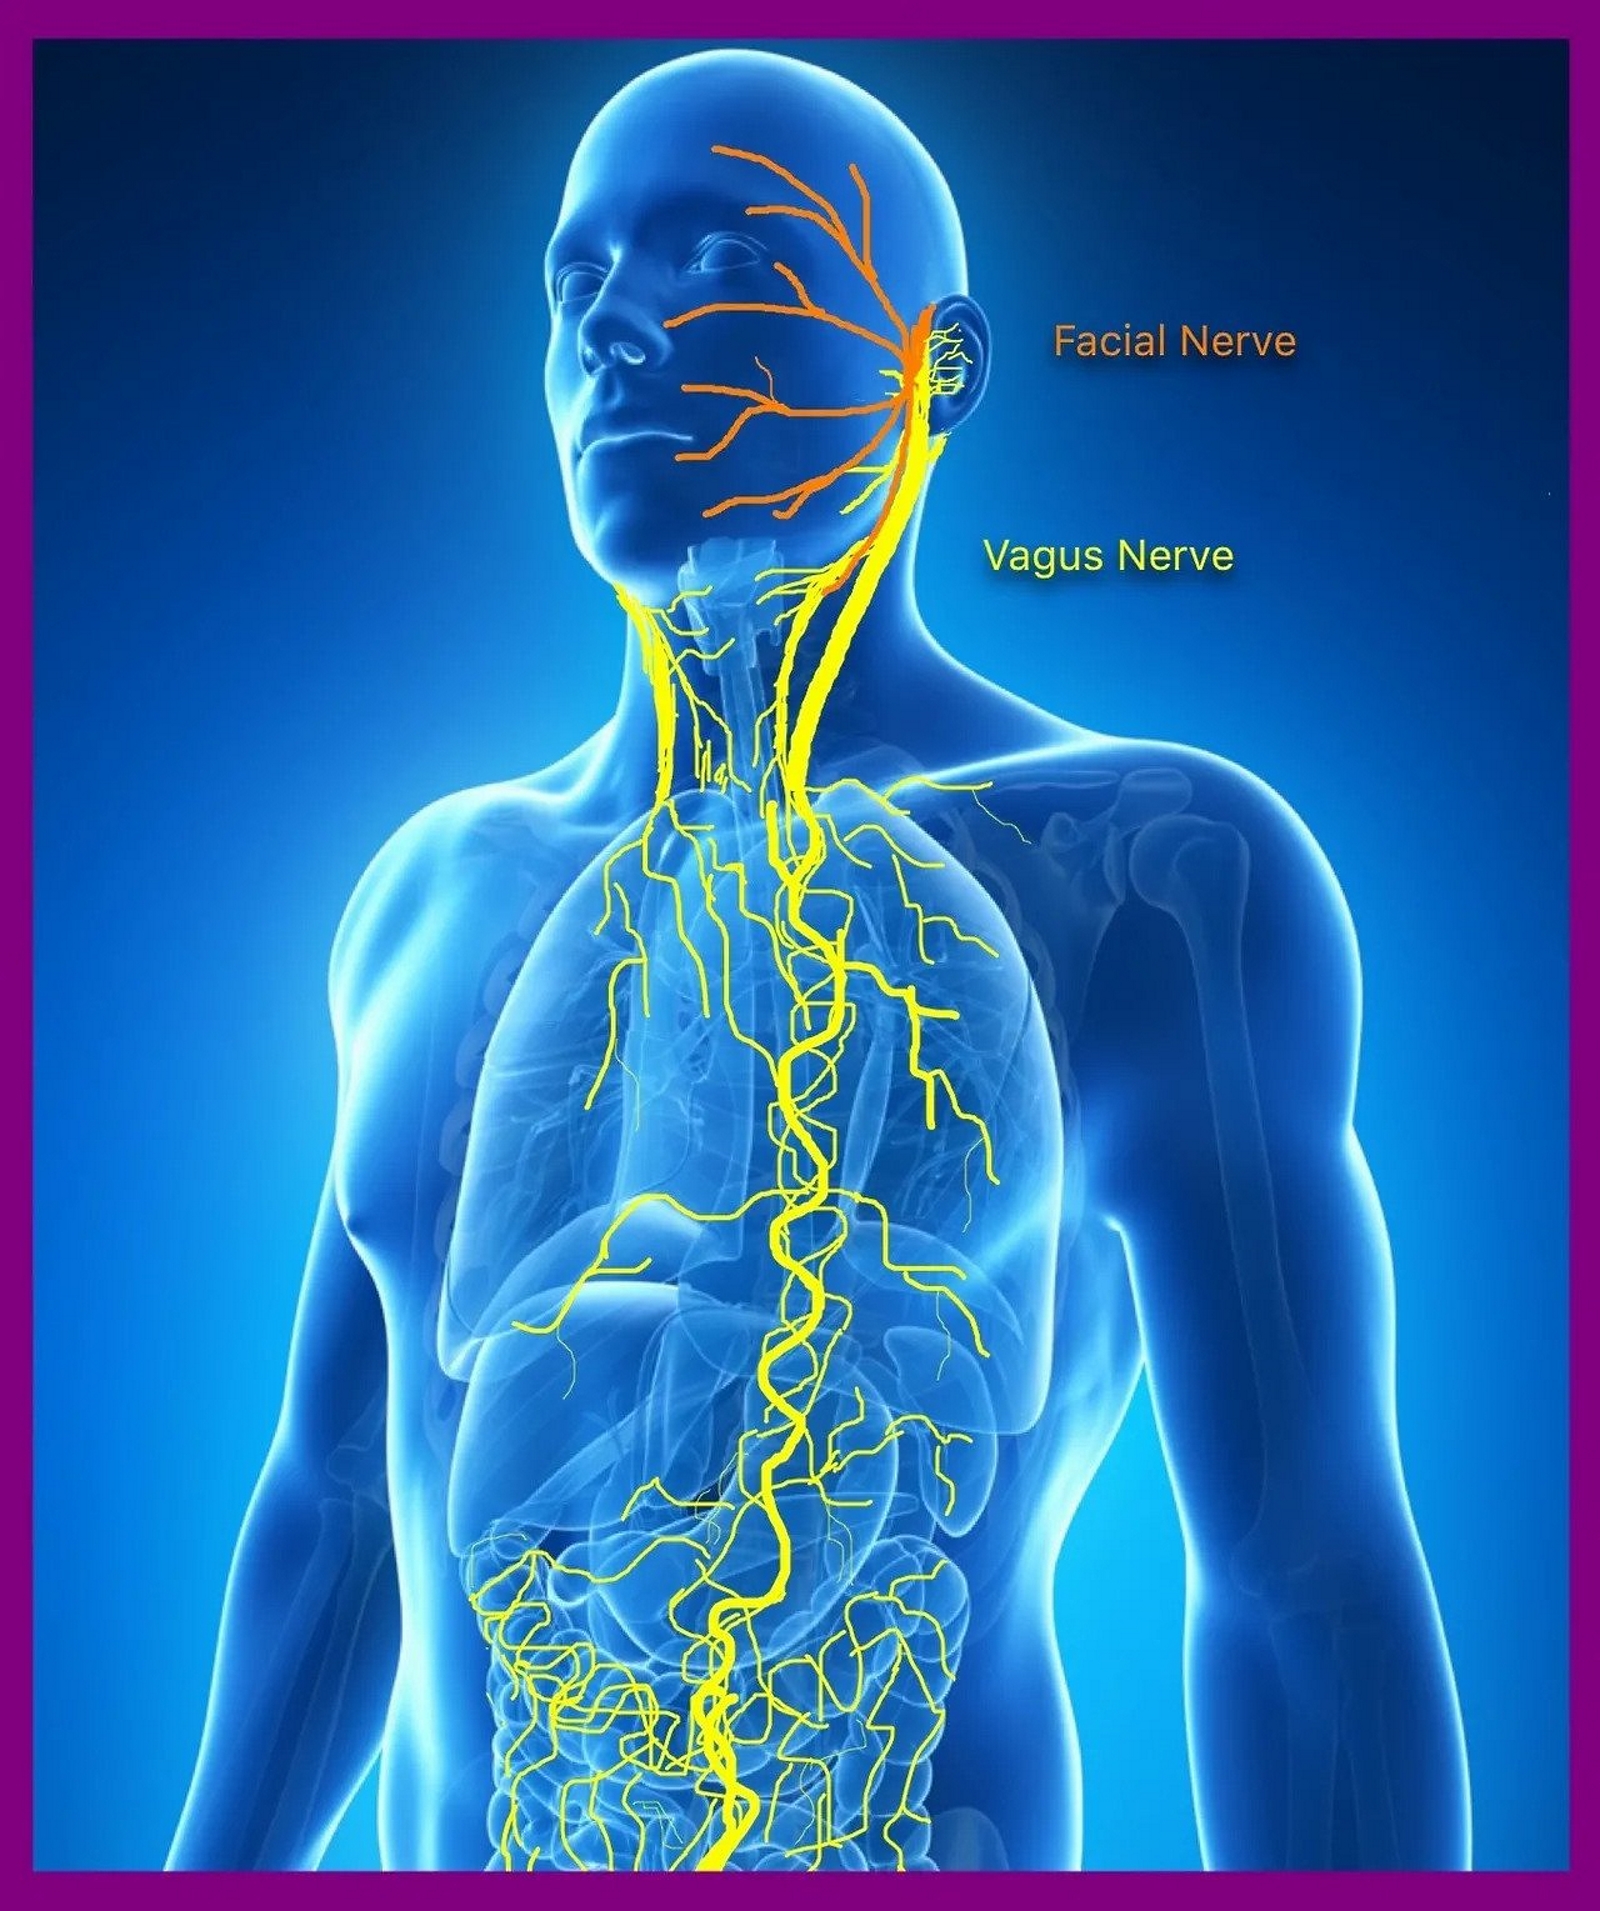 <p>Path of the Vagus Nerve. The image shows the path of the vagus nerve (and a section of the facial nerve).</p>